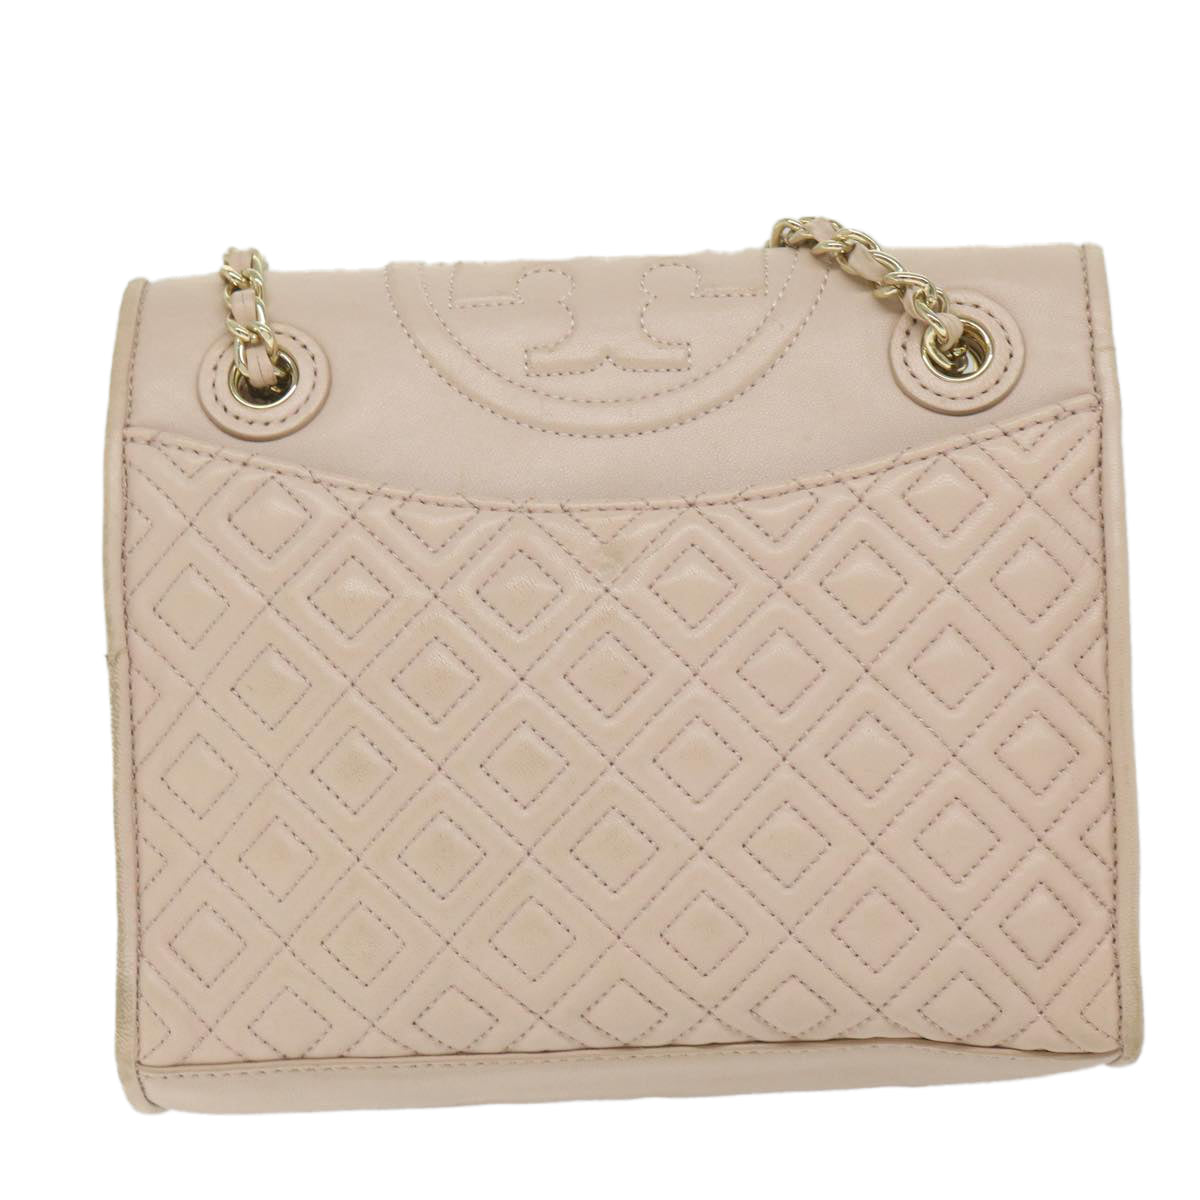 TORY BURCH Quilted Chain Shoulder Bag Leather Pink Auth am5282 - 0